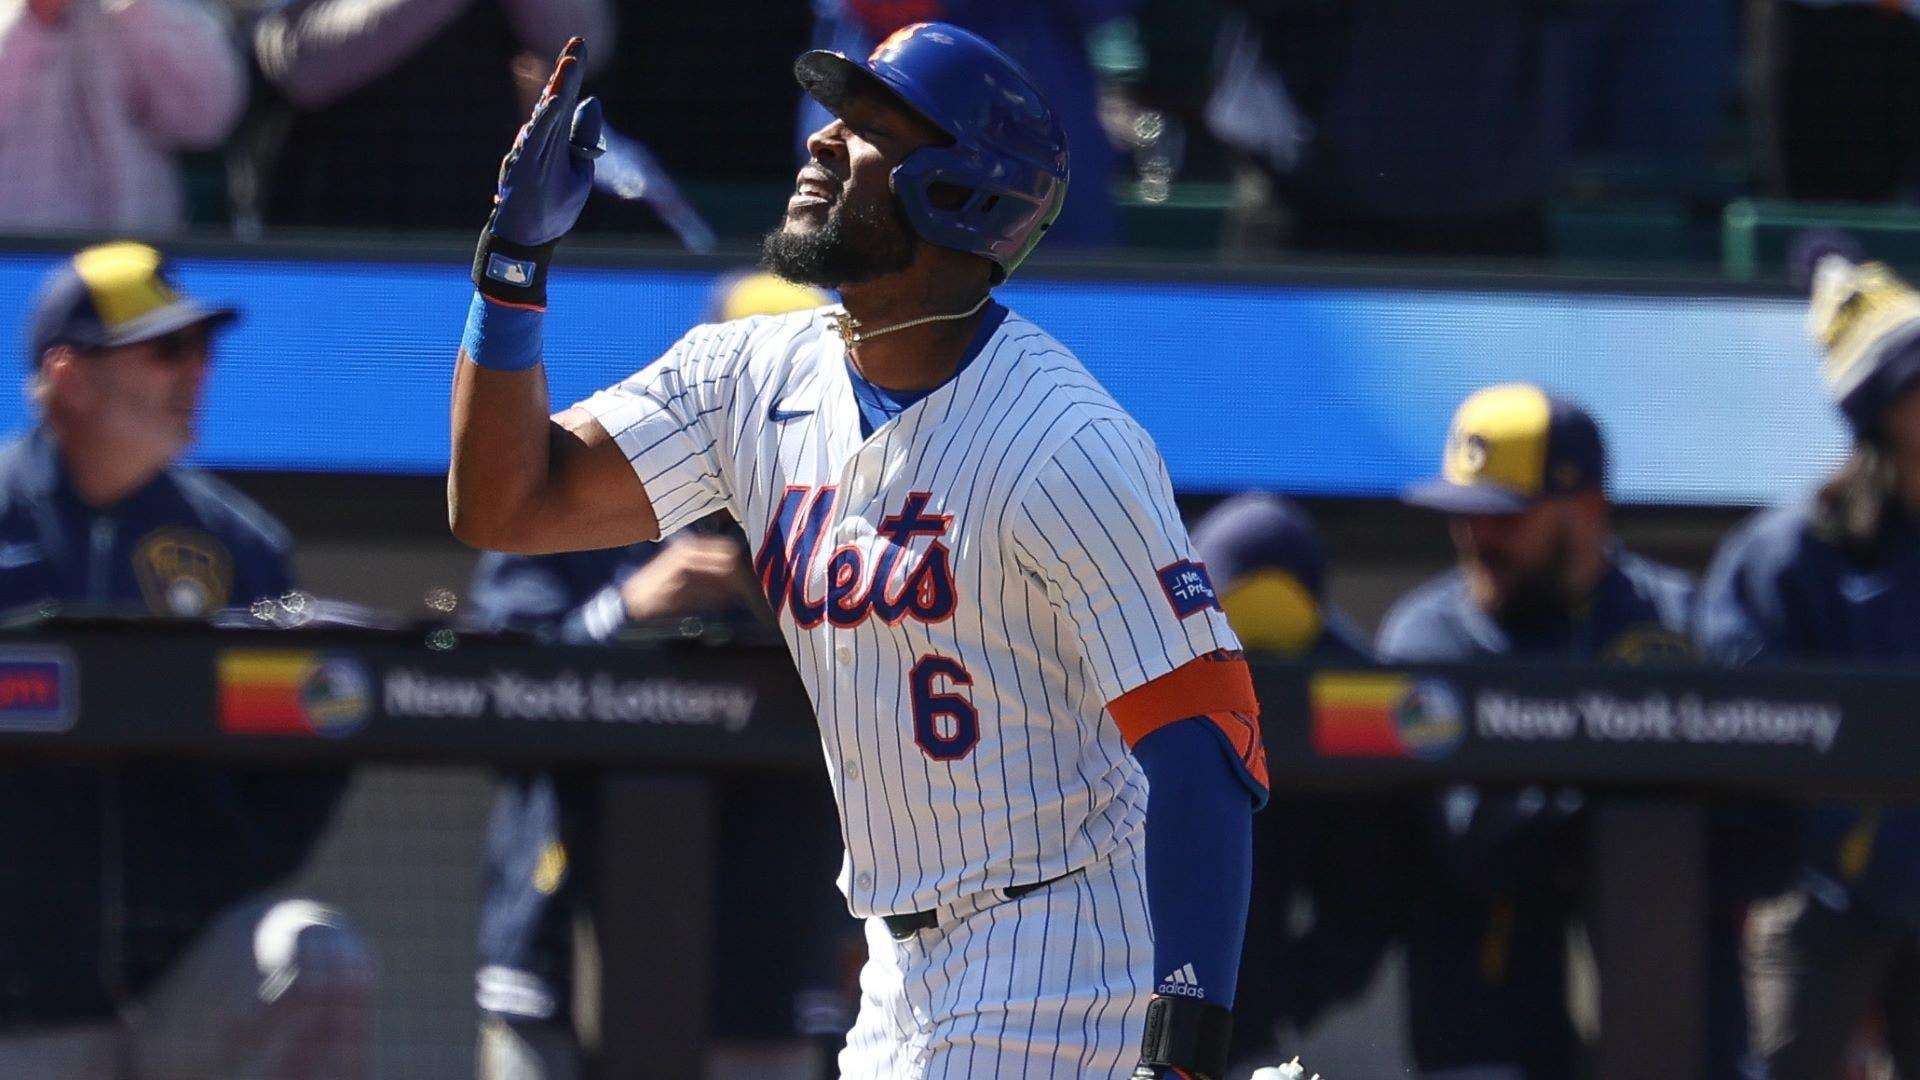 Mets Injury Notes: Starling Marte making progress, pair of relievers could join team soon